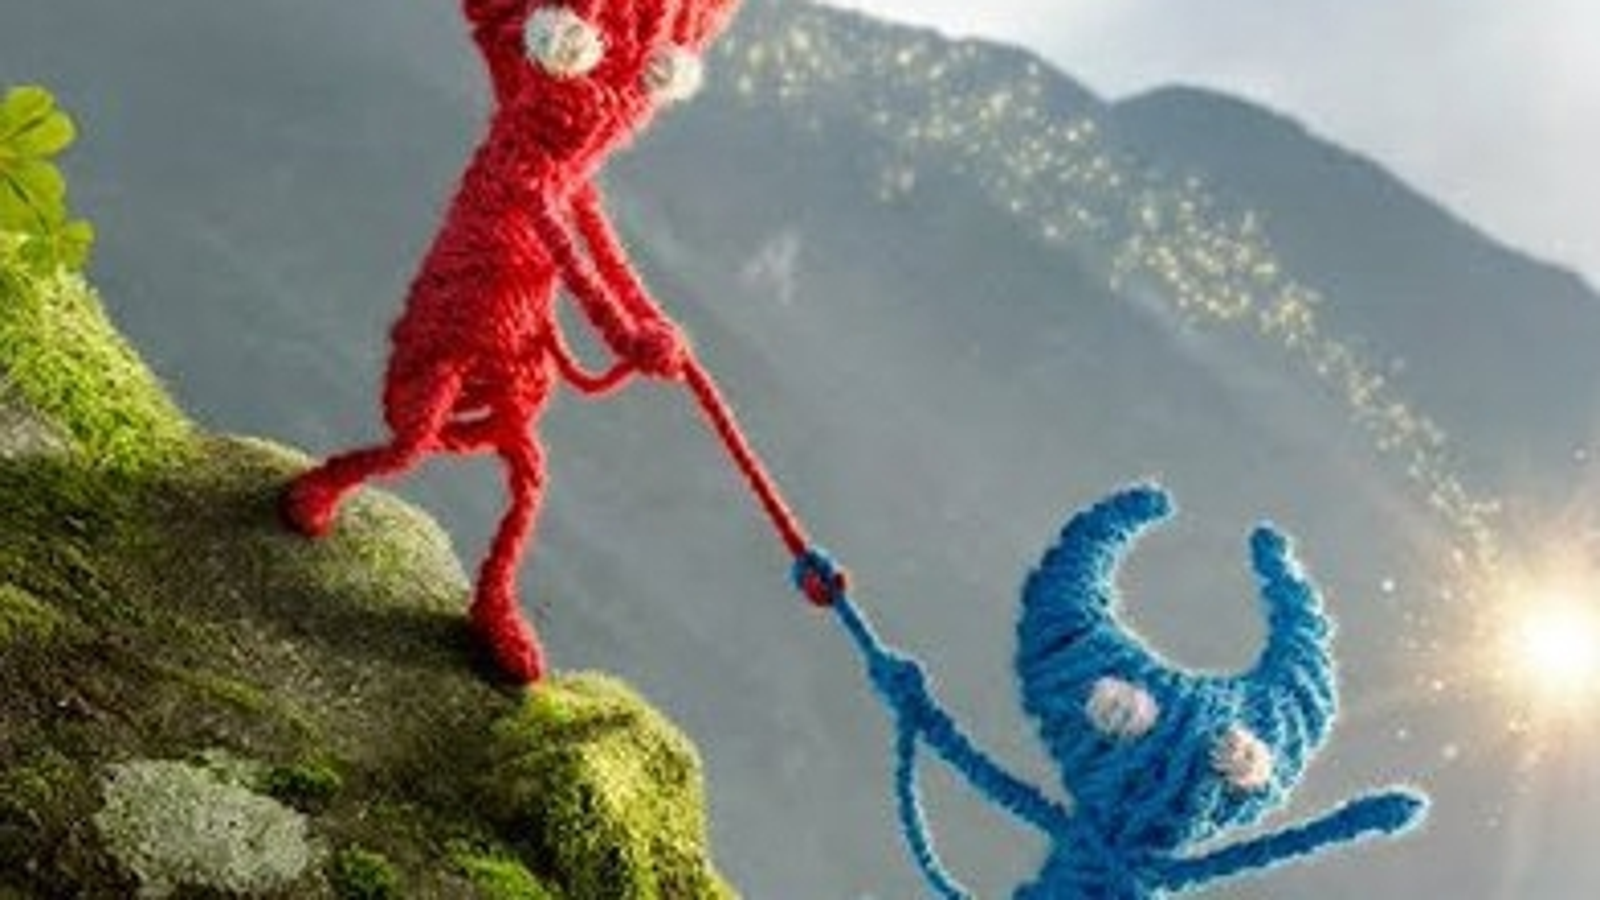 Unravel Two Review (Switch)